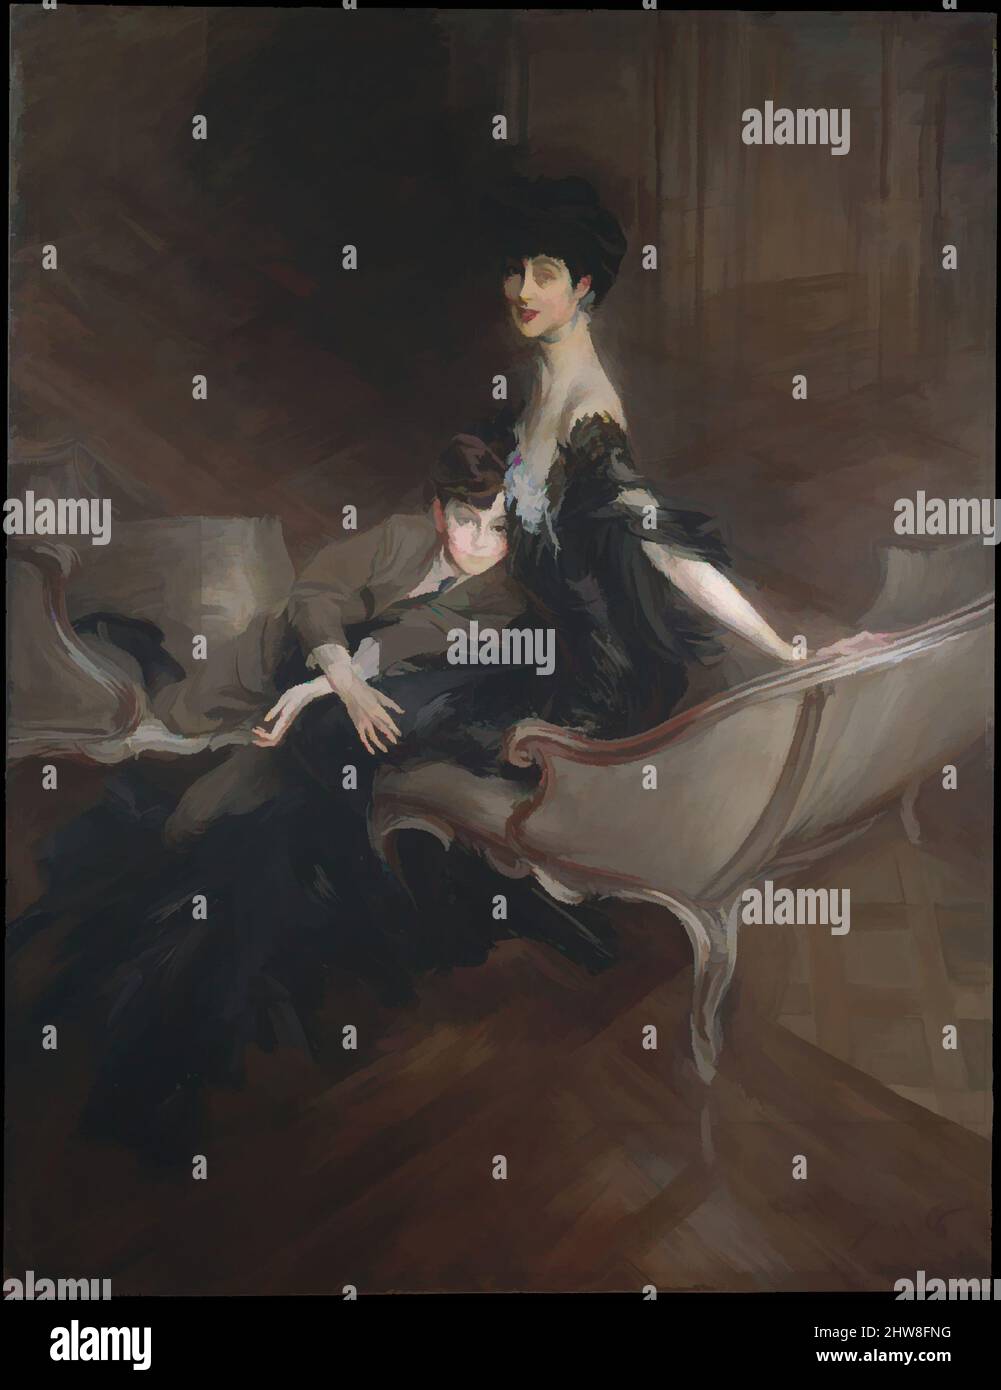 Art inspired by Consuelo Vanderbilt (1876–1964), Duchess of Marlborough, and Her Son, Lord Ivor Spencer-Churchill (1898–1956), 1906, Oil on canvas, 87 1/4 x 67 in. (221.6 x 170.2 cm), Paintings, Giovanni Boldini (Italian, Ferrara 1842–1931 Paris), Strikingly beautiful, elegant, and, Classic works modernized by Artotop with a splash of modernity. Shapes, color and value, eye-catching visual impact on art. Emotions through freedom of artworks in a contemporary way. A timeless message pursuing a wildly creative new direction. Artists turning to the digital medium and creating the Artotop NFT Stock Photo